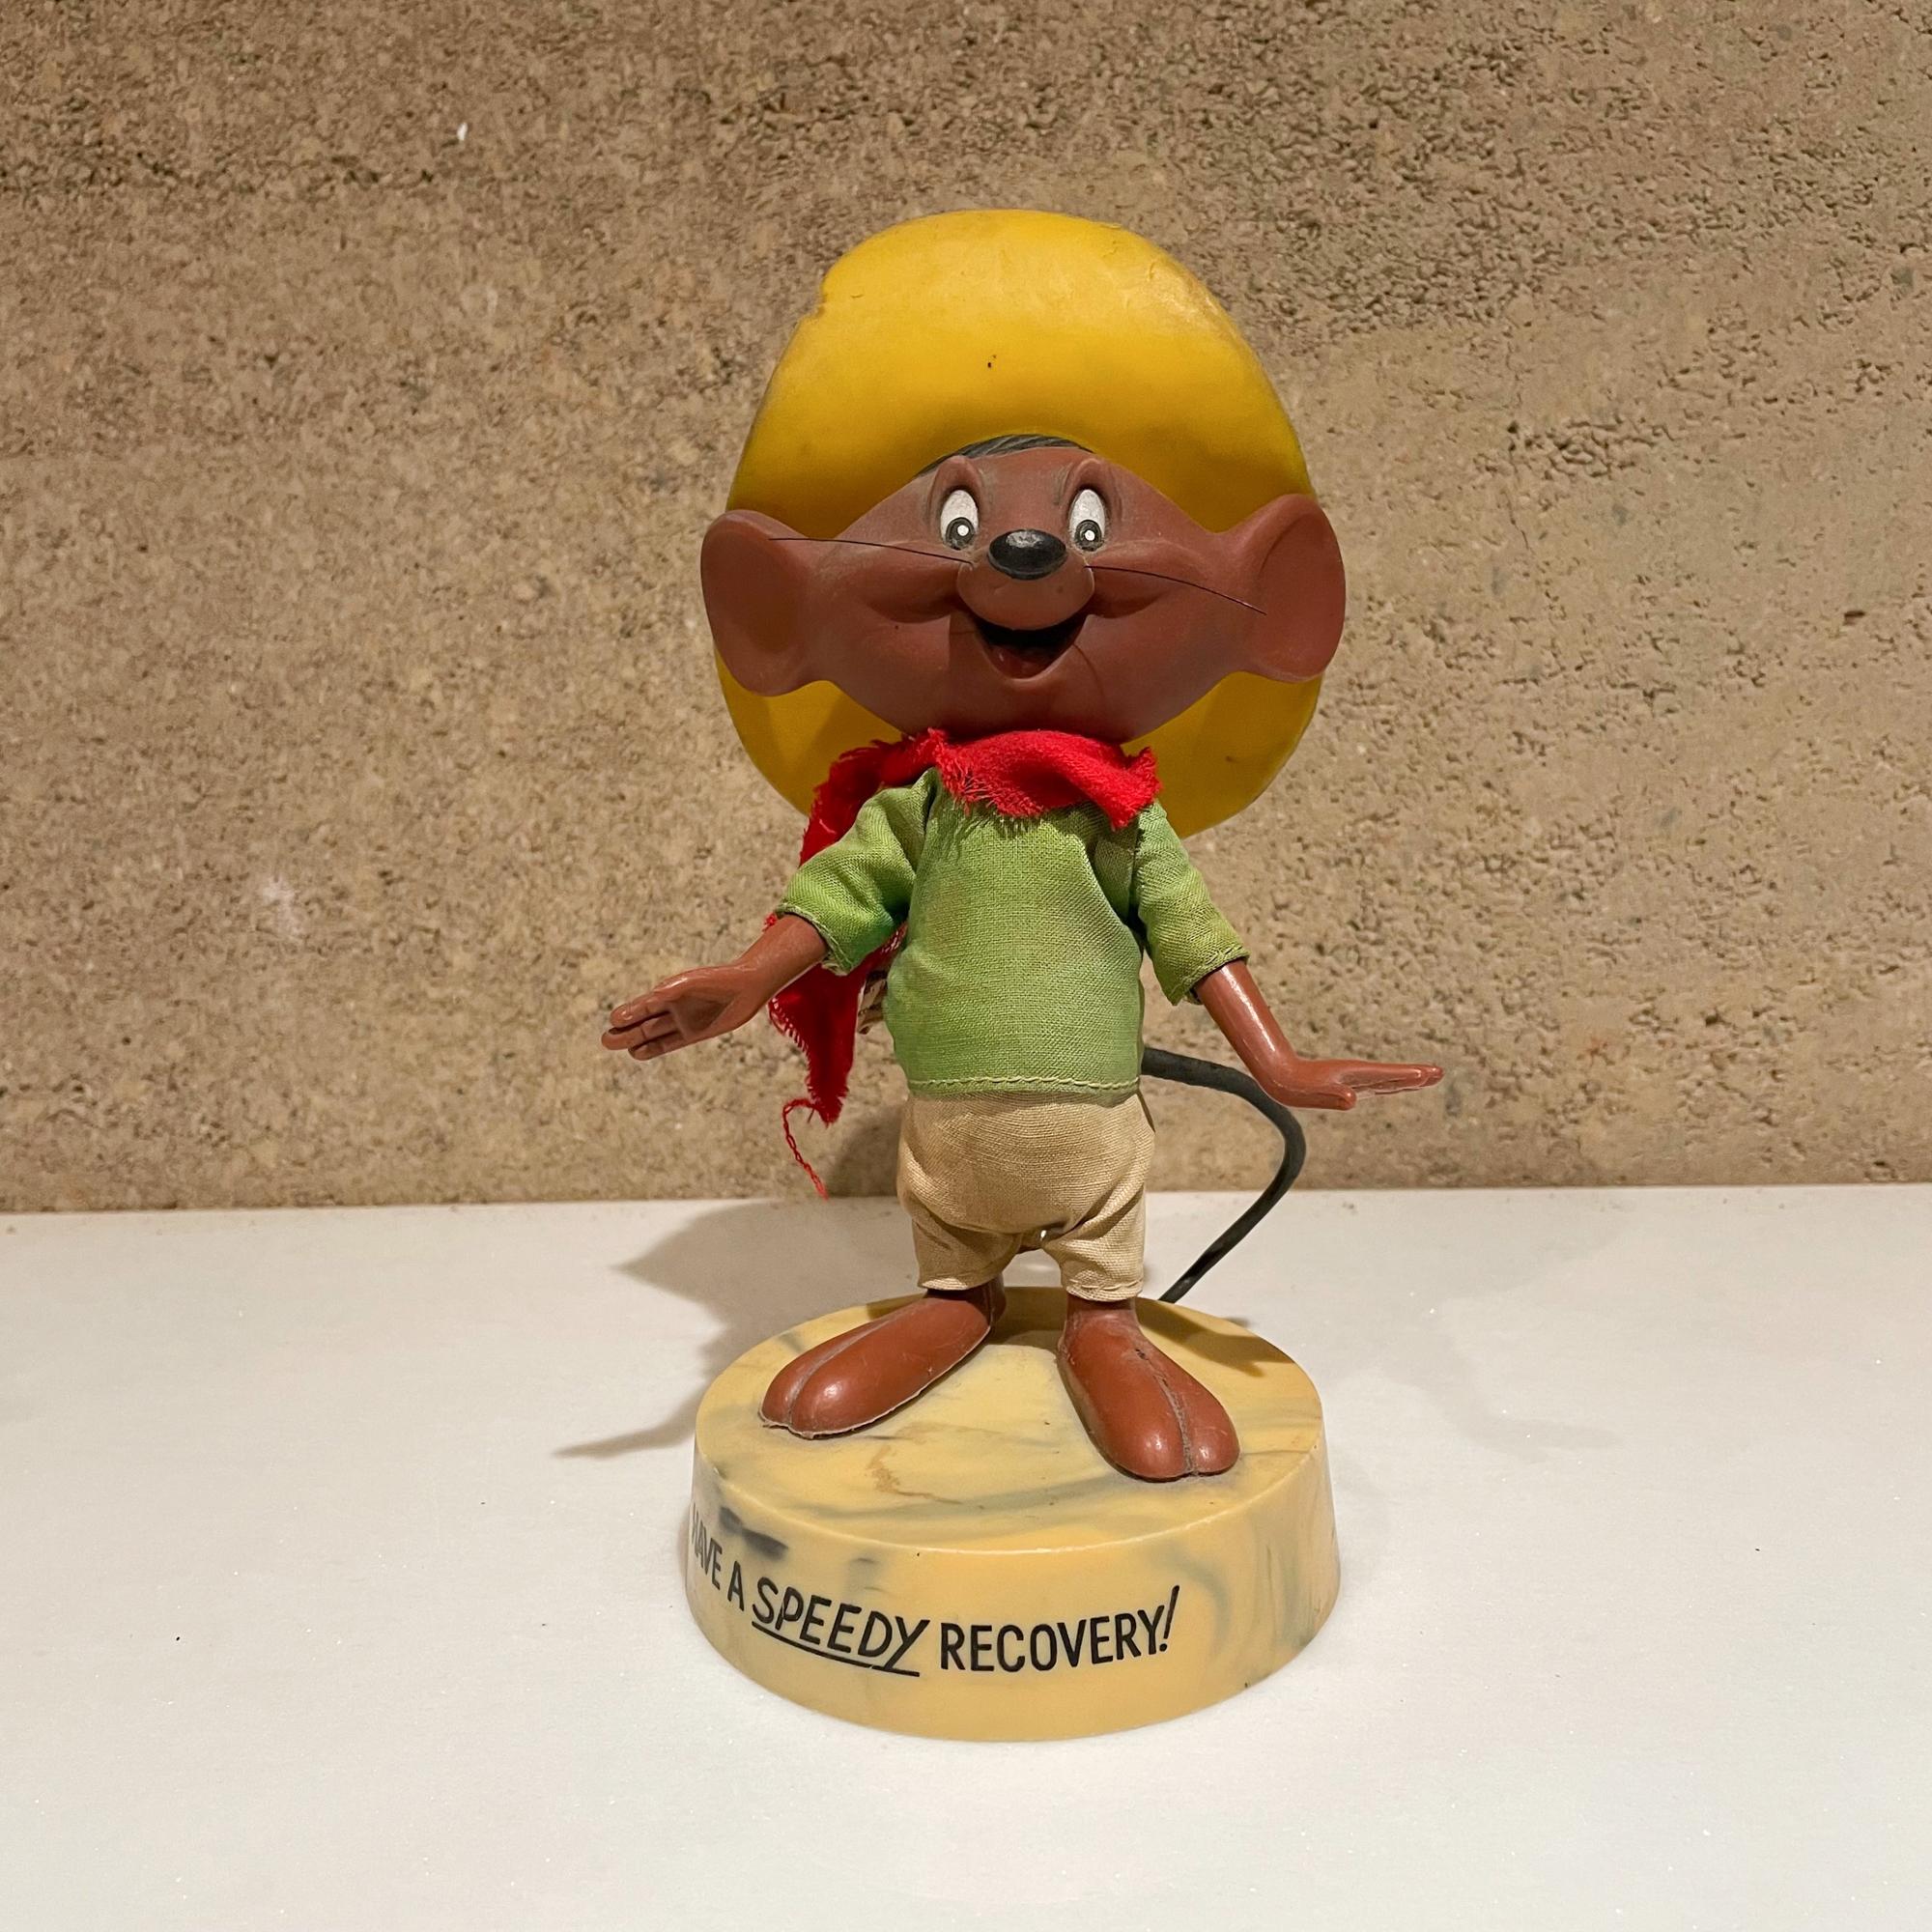 Speedy Gonzales Speedy Recovery!
1971 Cute Speedy Gonzales figure stating: Have a SPEEDY RECOVERY! Looney Tunes Warner Bros Vintage by R Dakin and Co.
Adorable midcentury vintage -great get well gift idea.
Measures: 8.5 x 5.5 D x 3.75 W